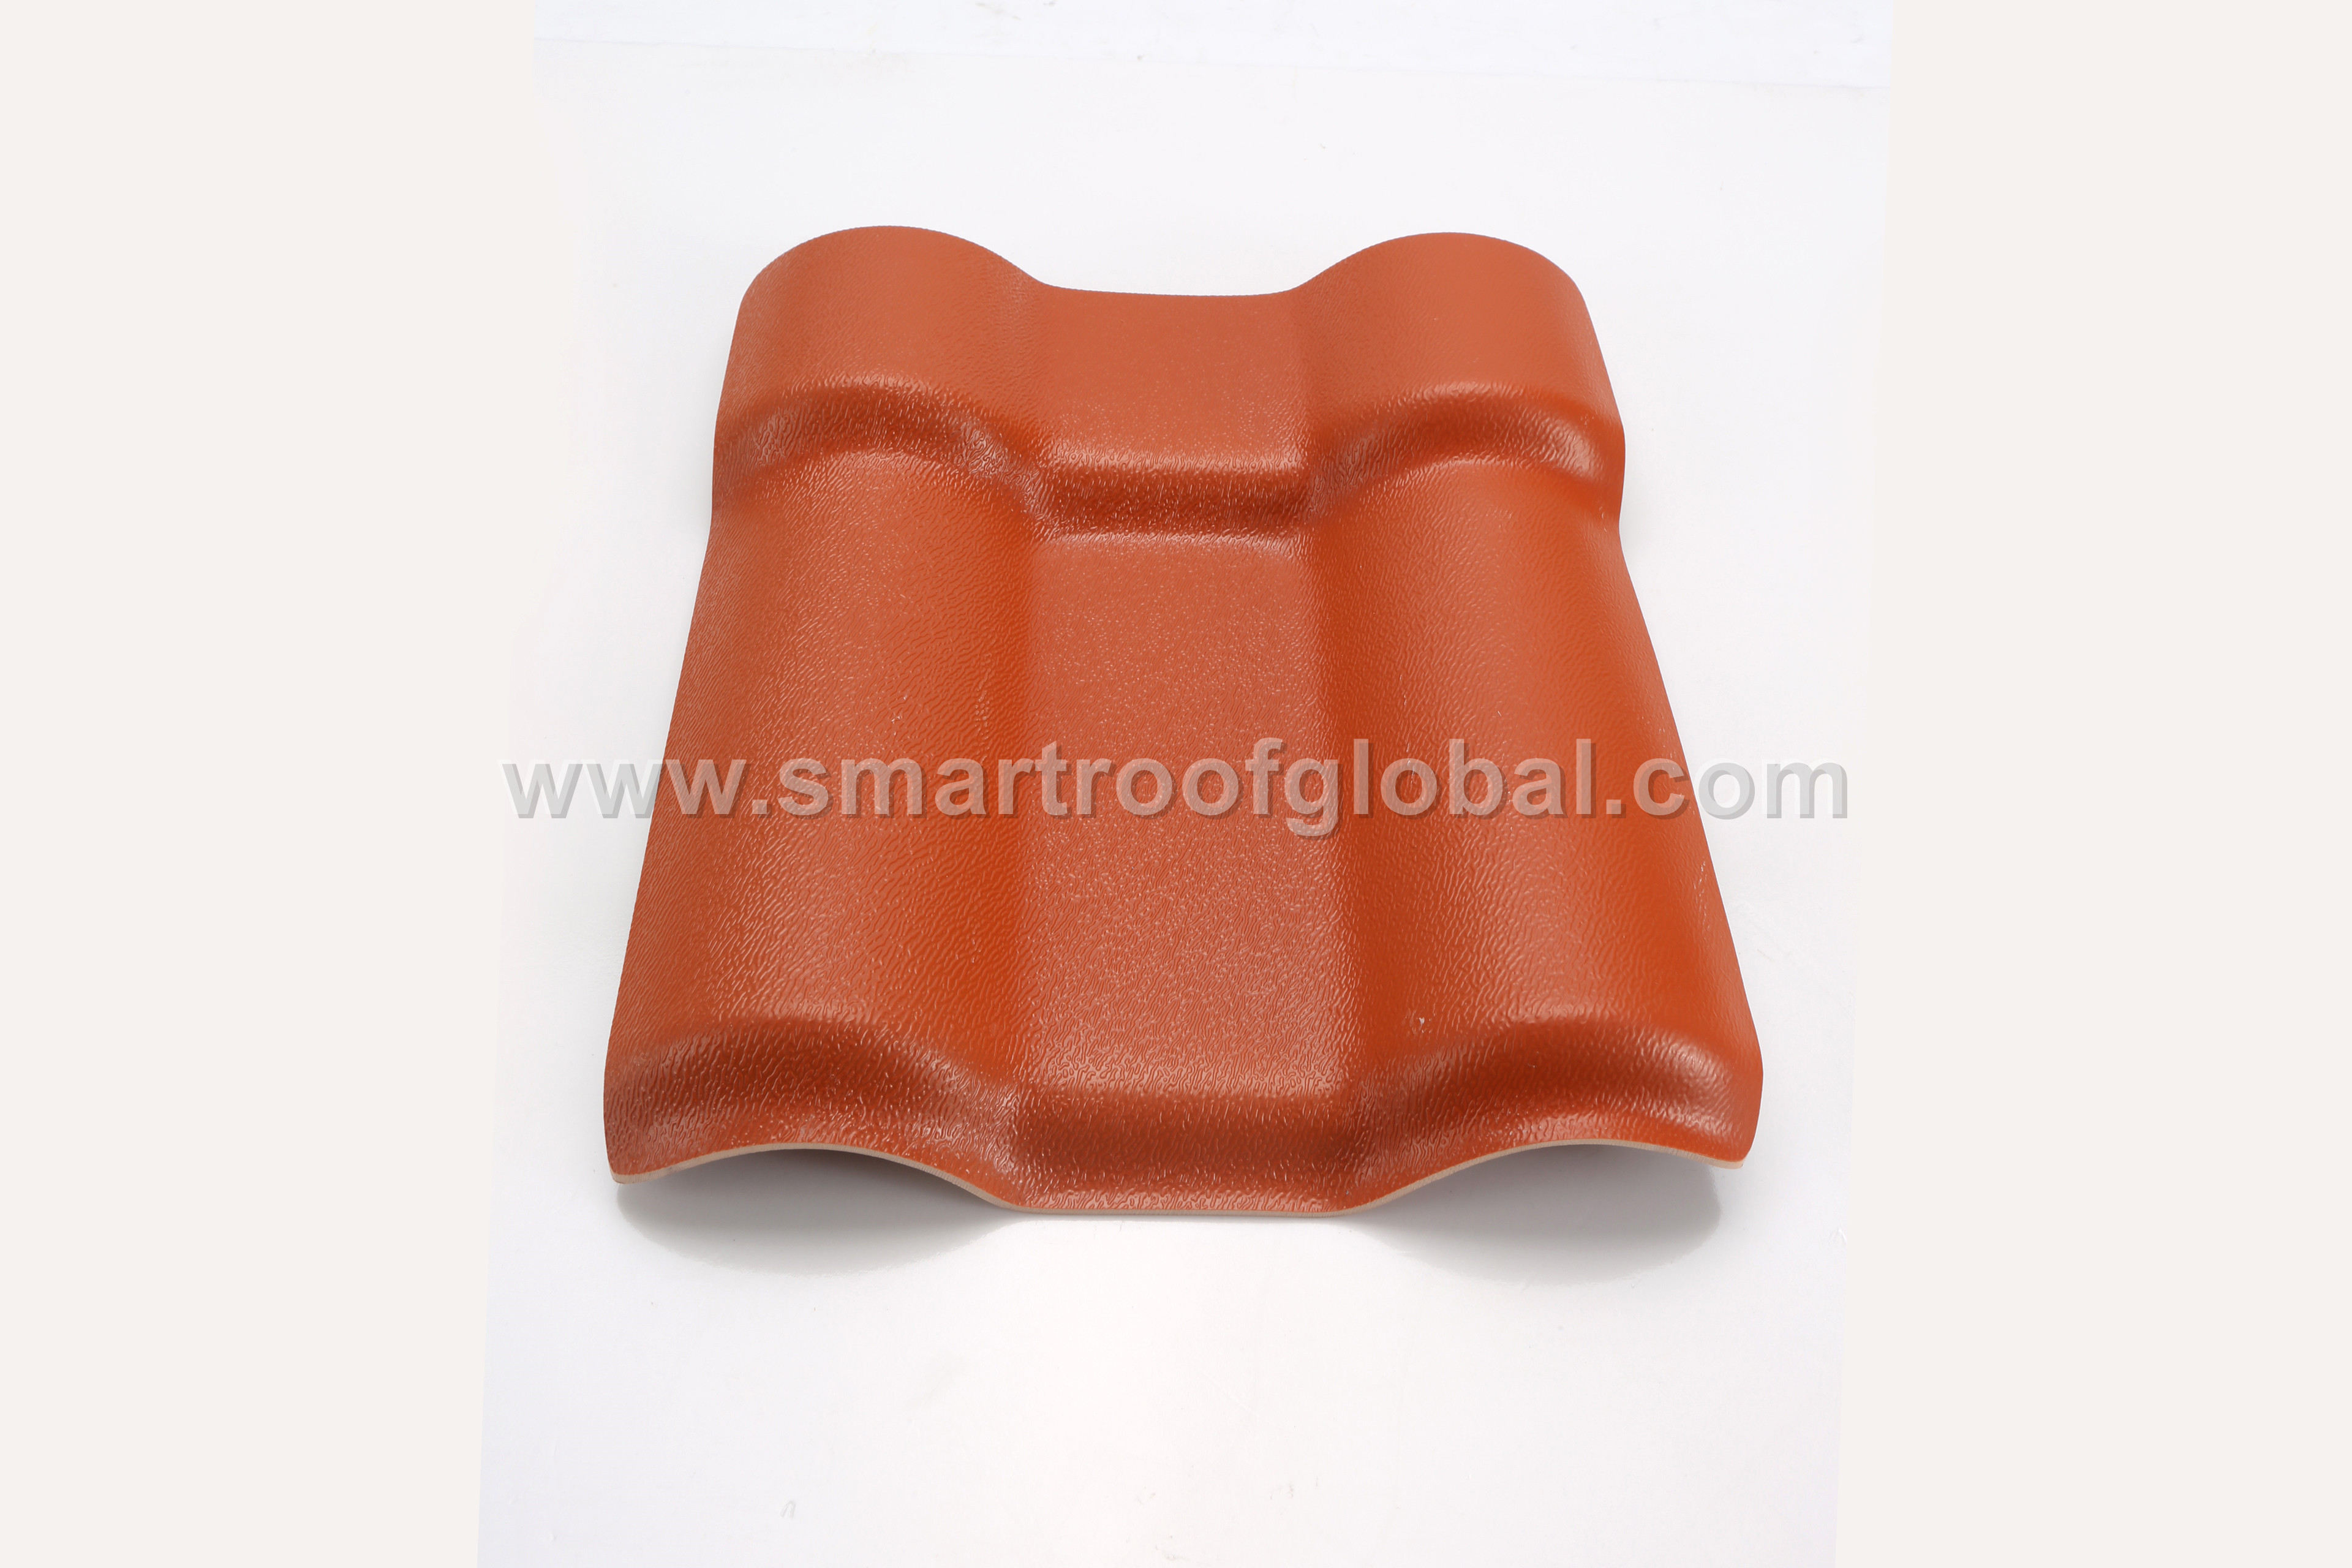 New Delivery for Polycarbonate Roofing Sheet - Epoxy Resin Roofing – Smartroof